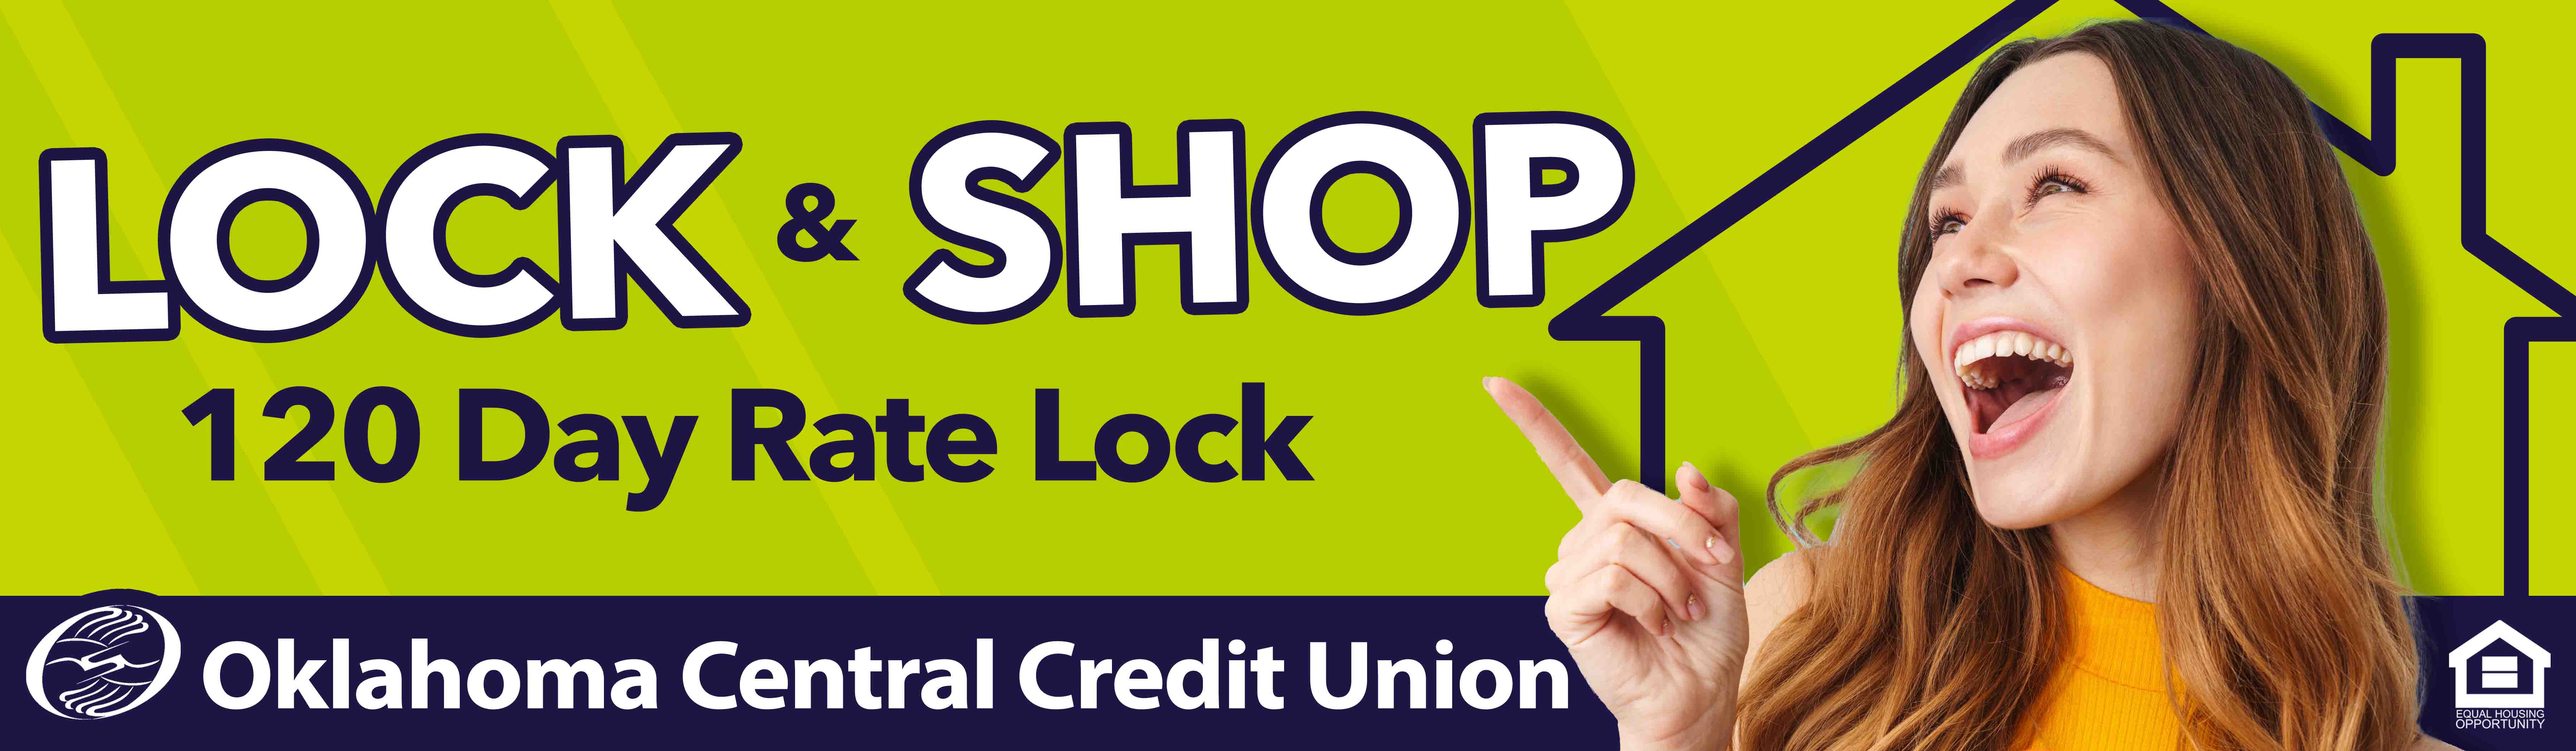 shop and lock